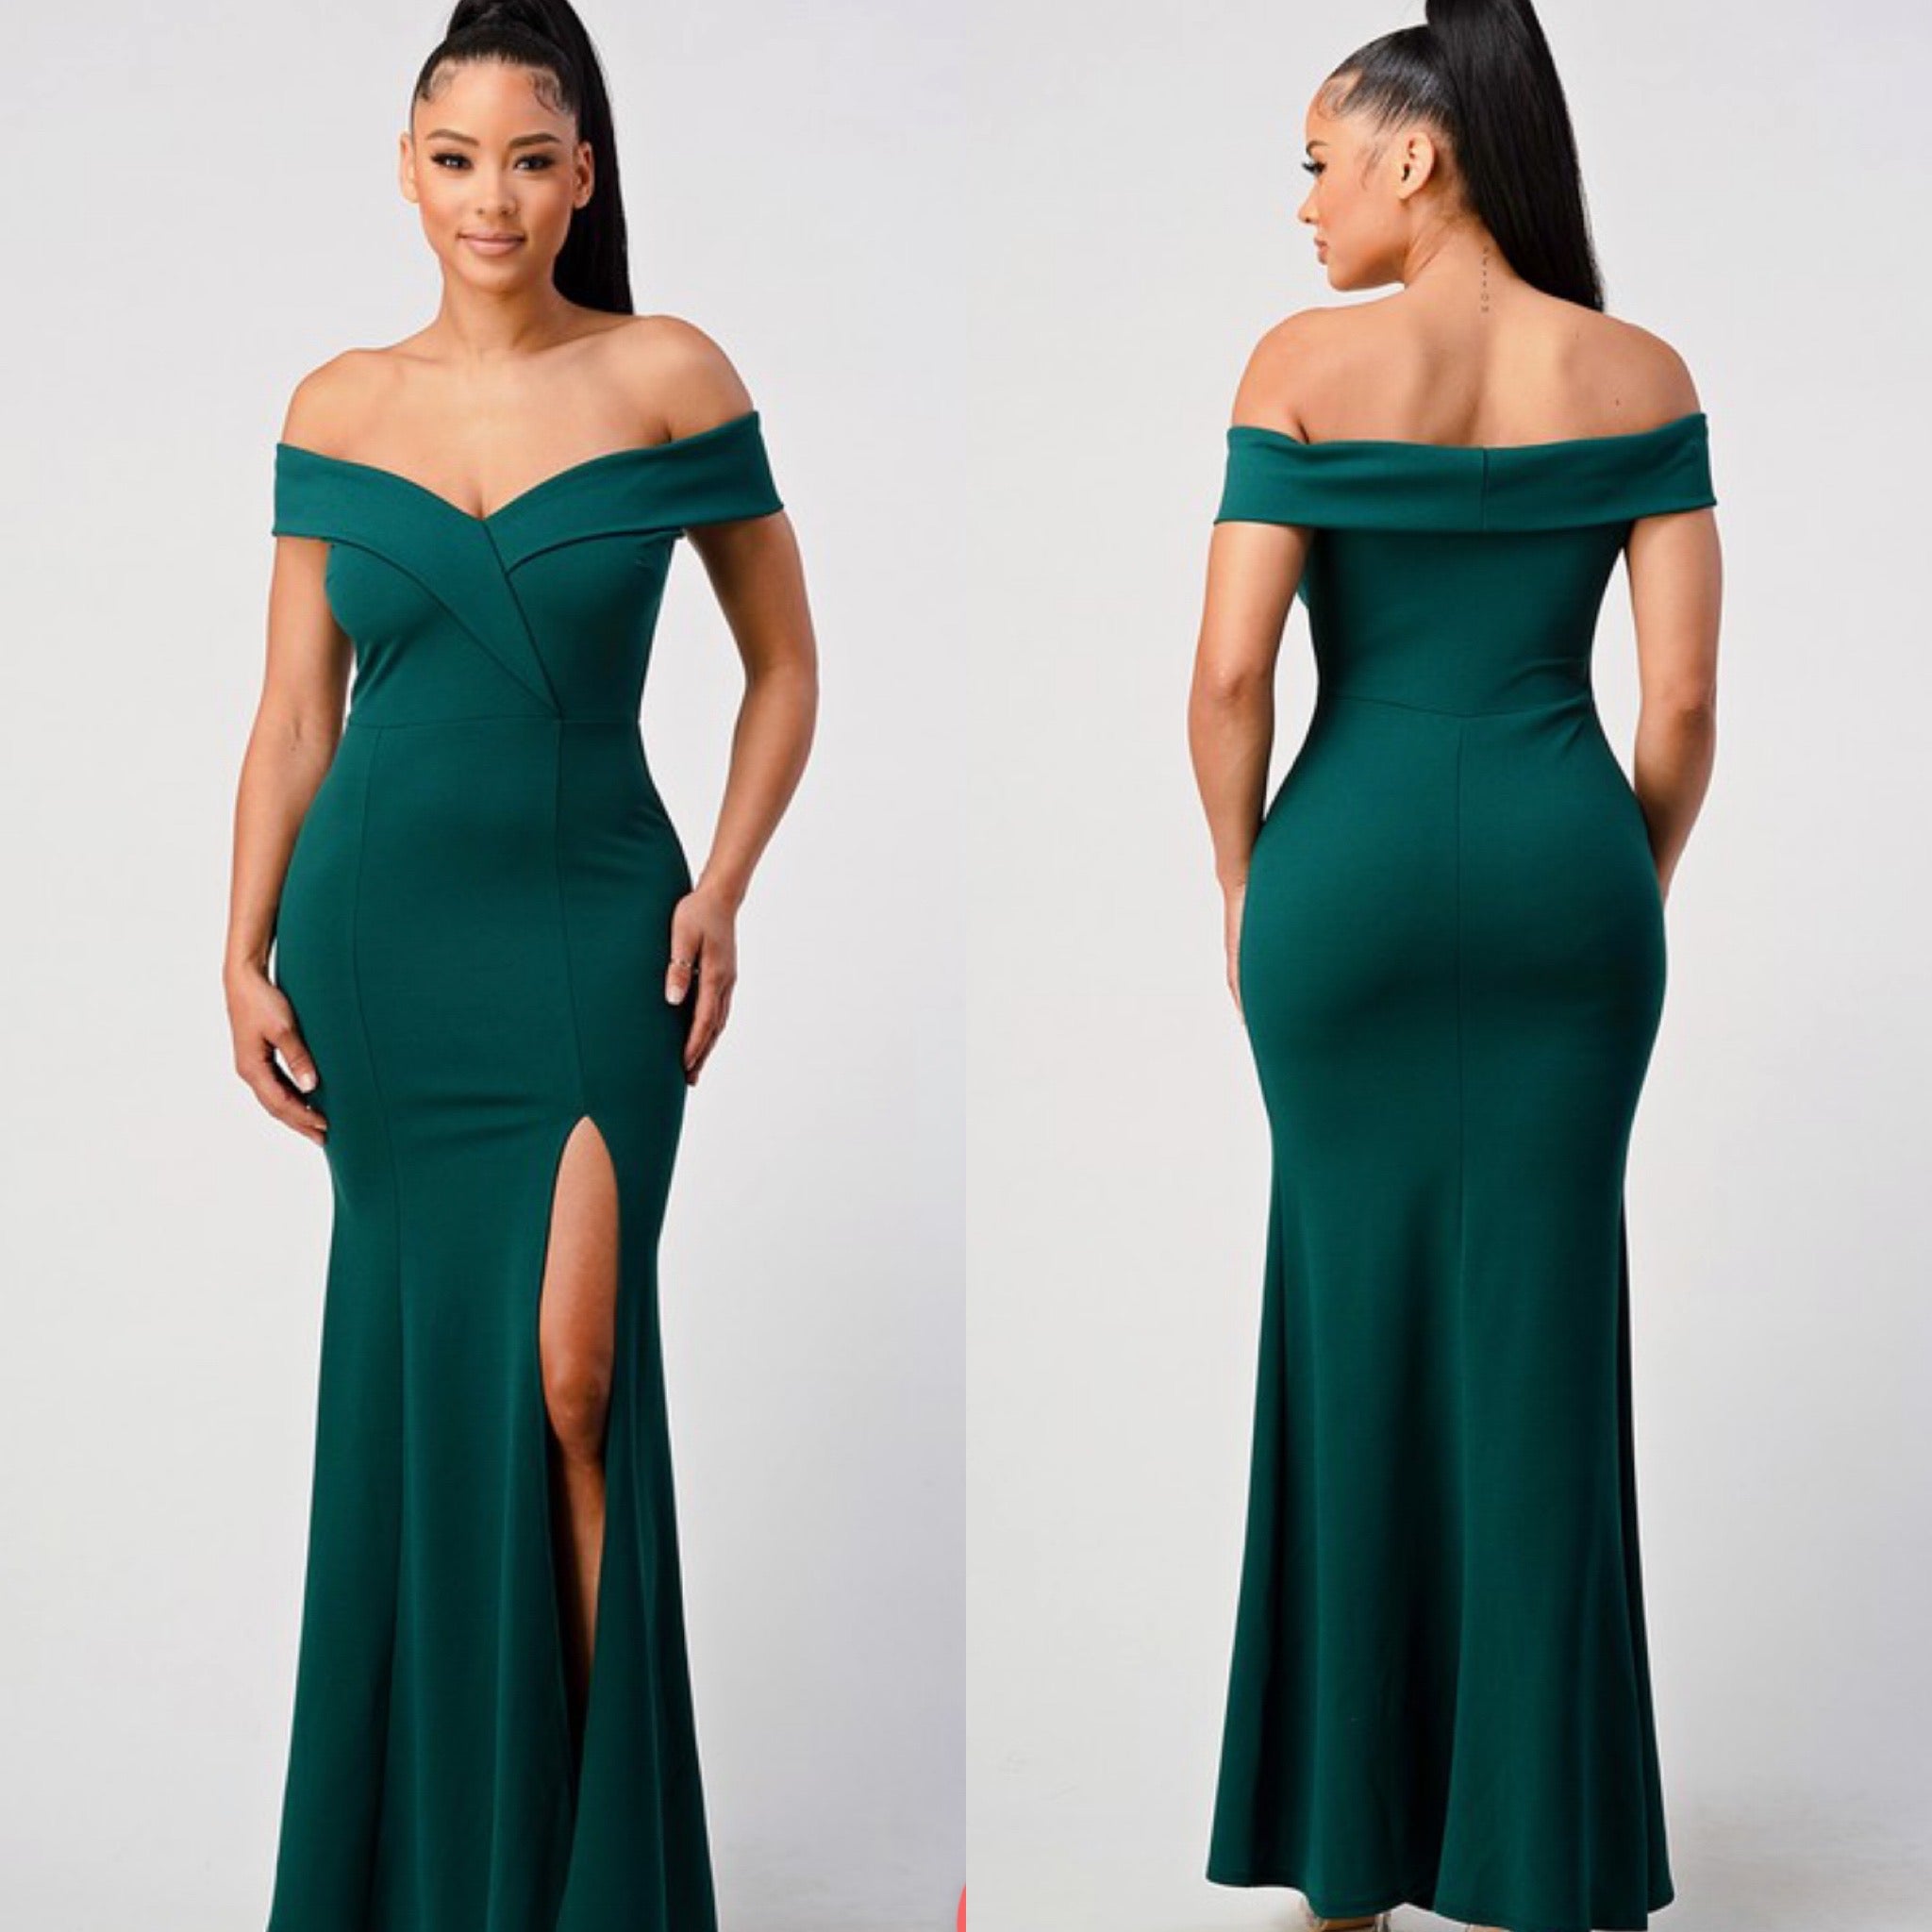 Upscale City Girl Gown - Hunter Green